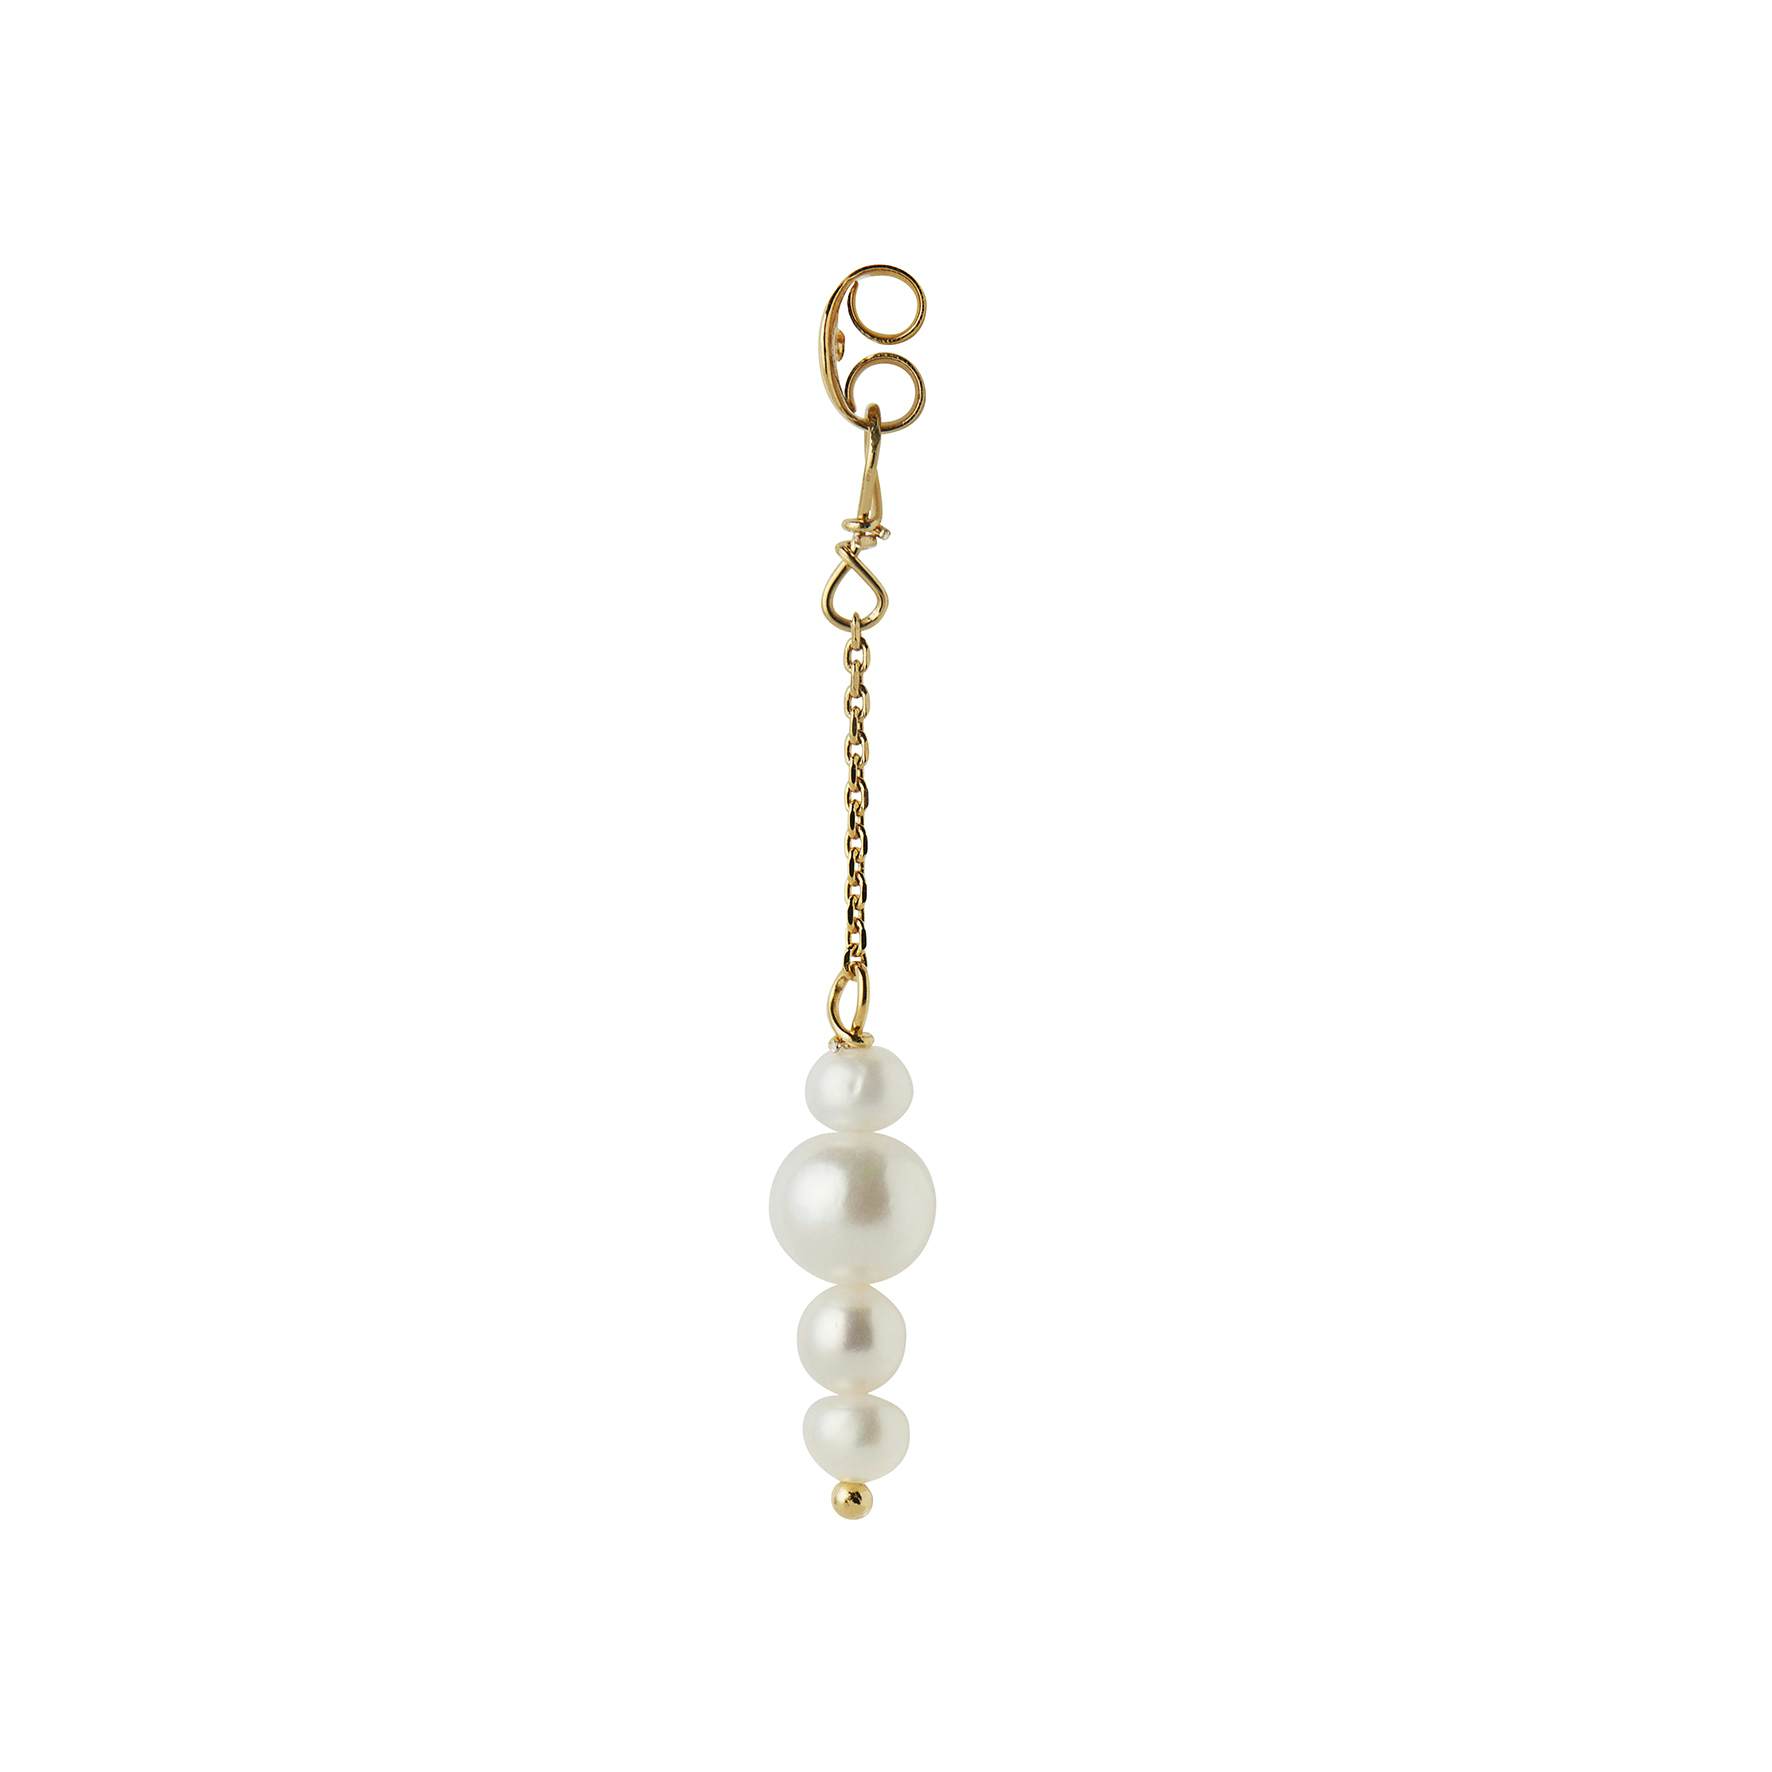 Pearl Berries Behind Ear Earring fra STINE A Jewelry i Forgyldt-Sølv Sterling 925